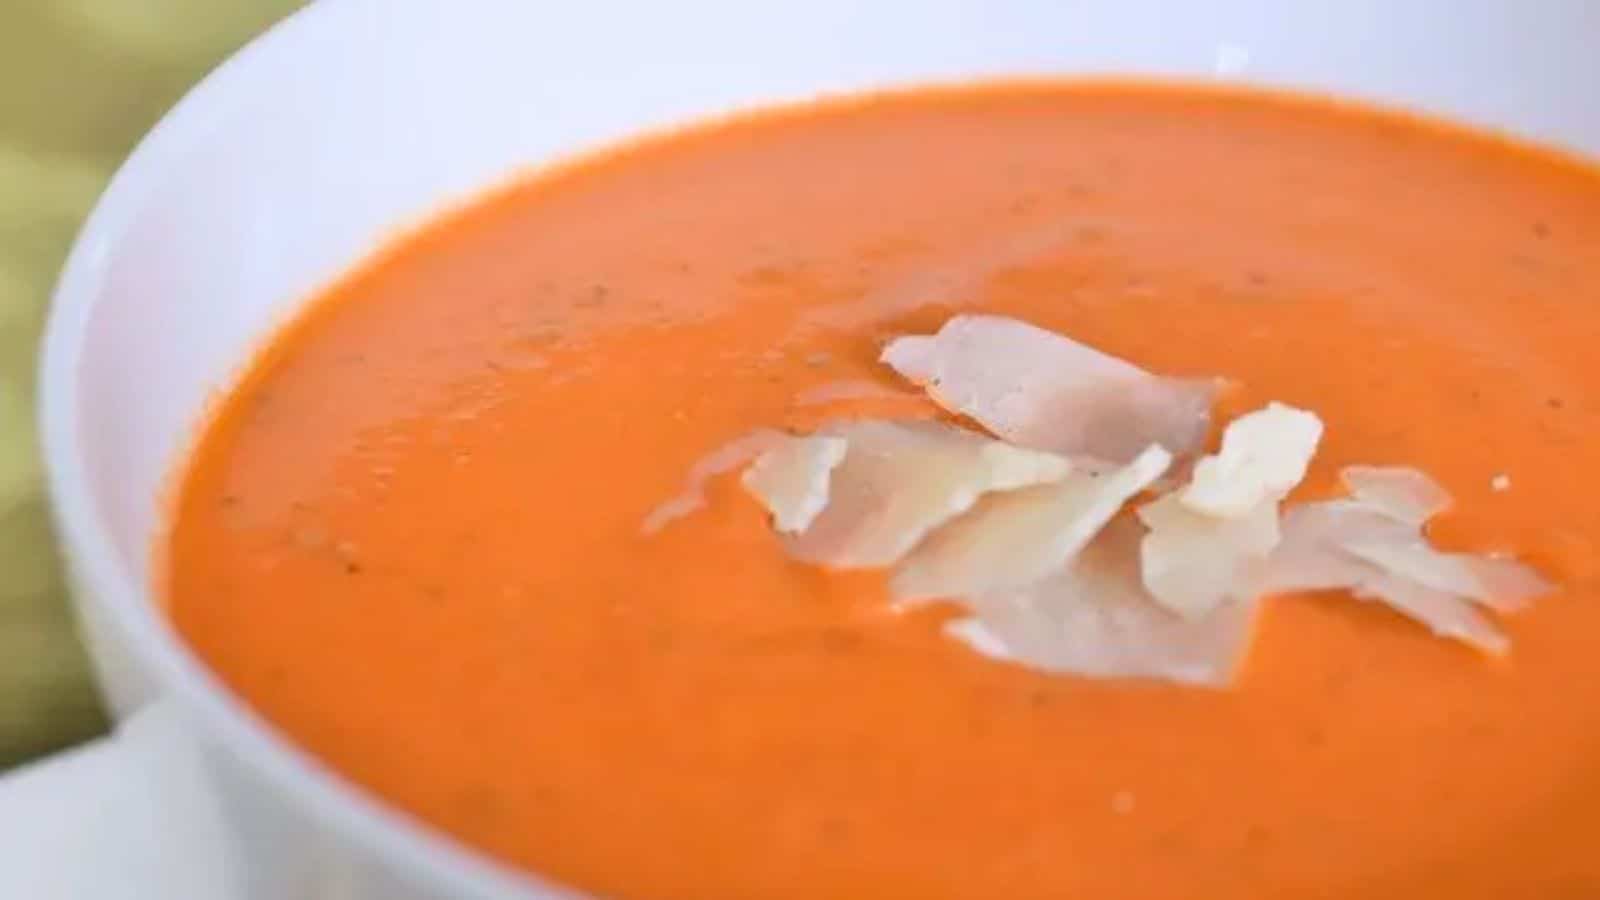 Image shows a close up of a bowl of Tomato Basil Bisque with grated parmesan on top of it.